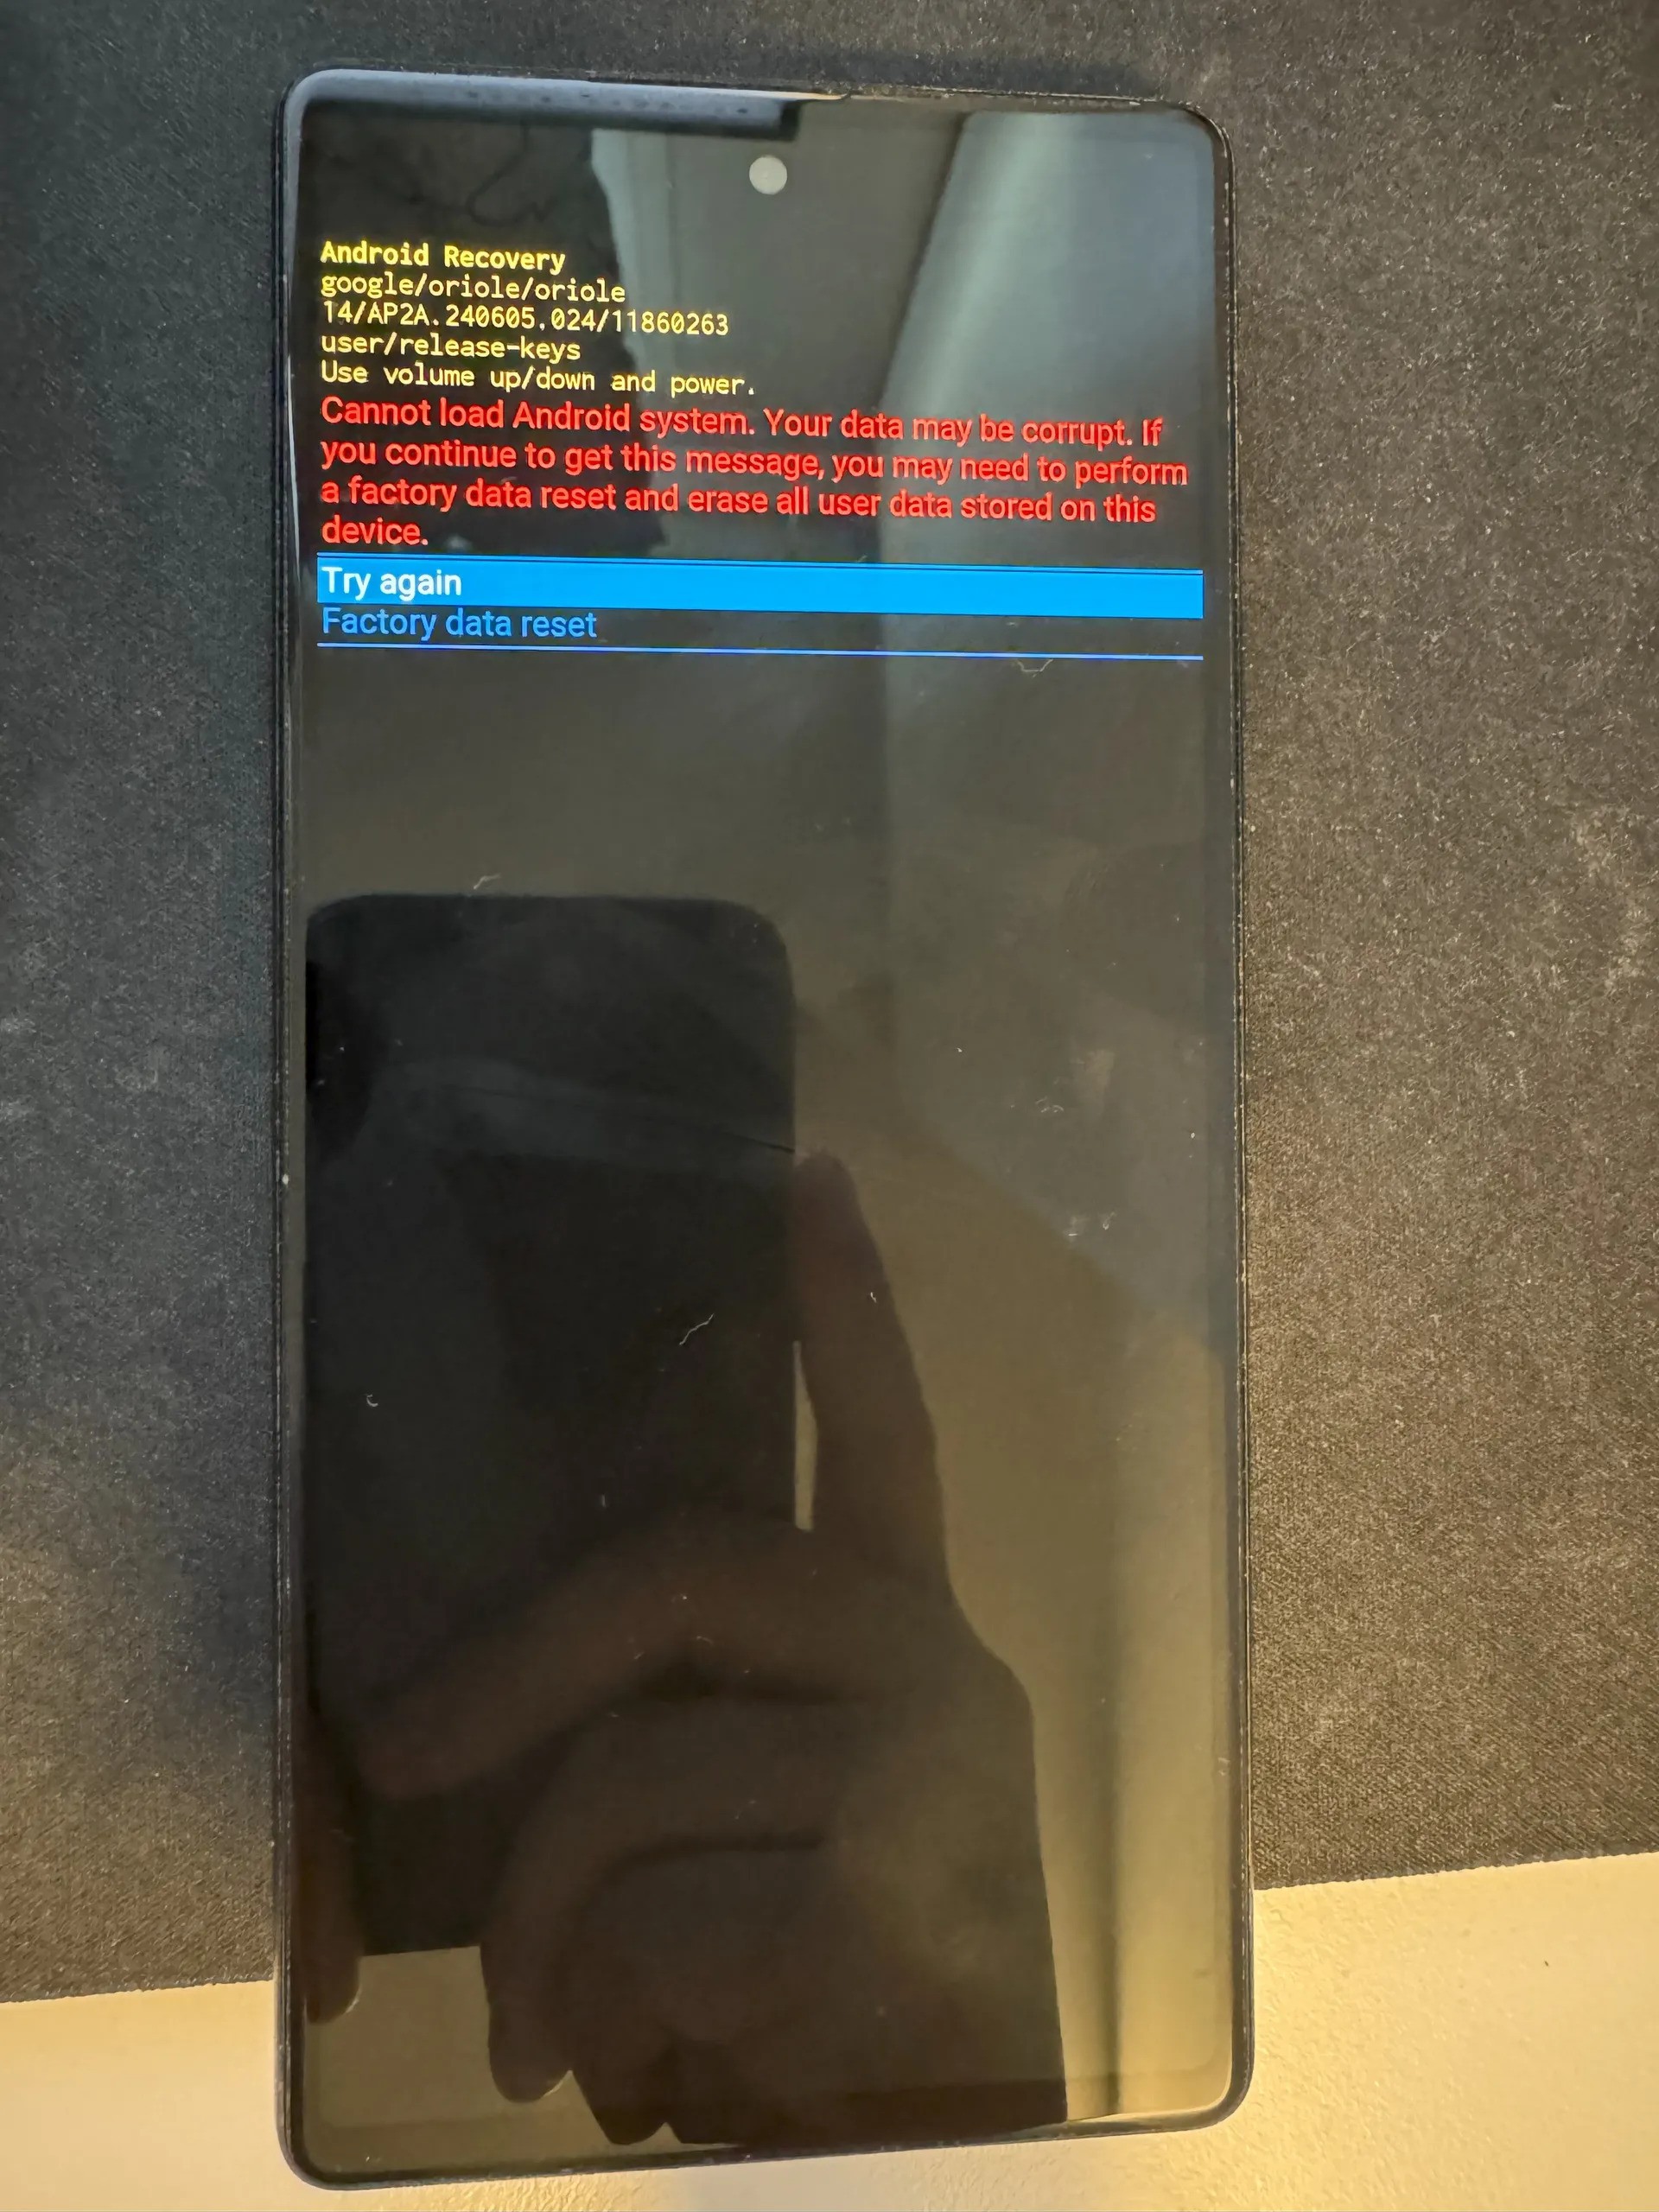 A photo of the error message on a bricked Pixel 6 device.